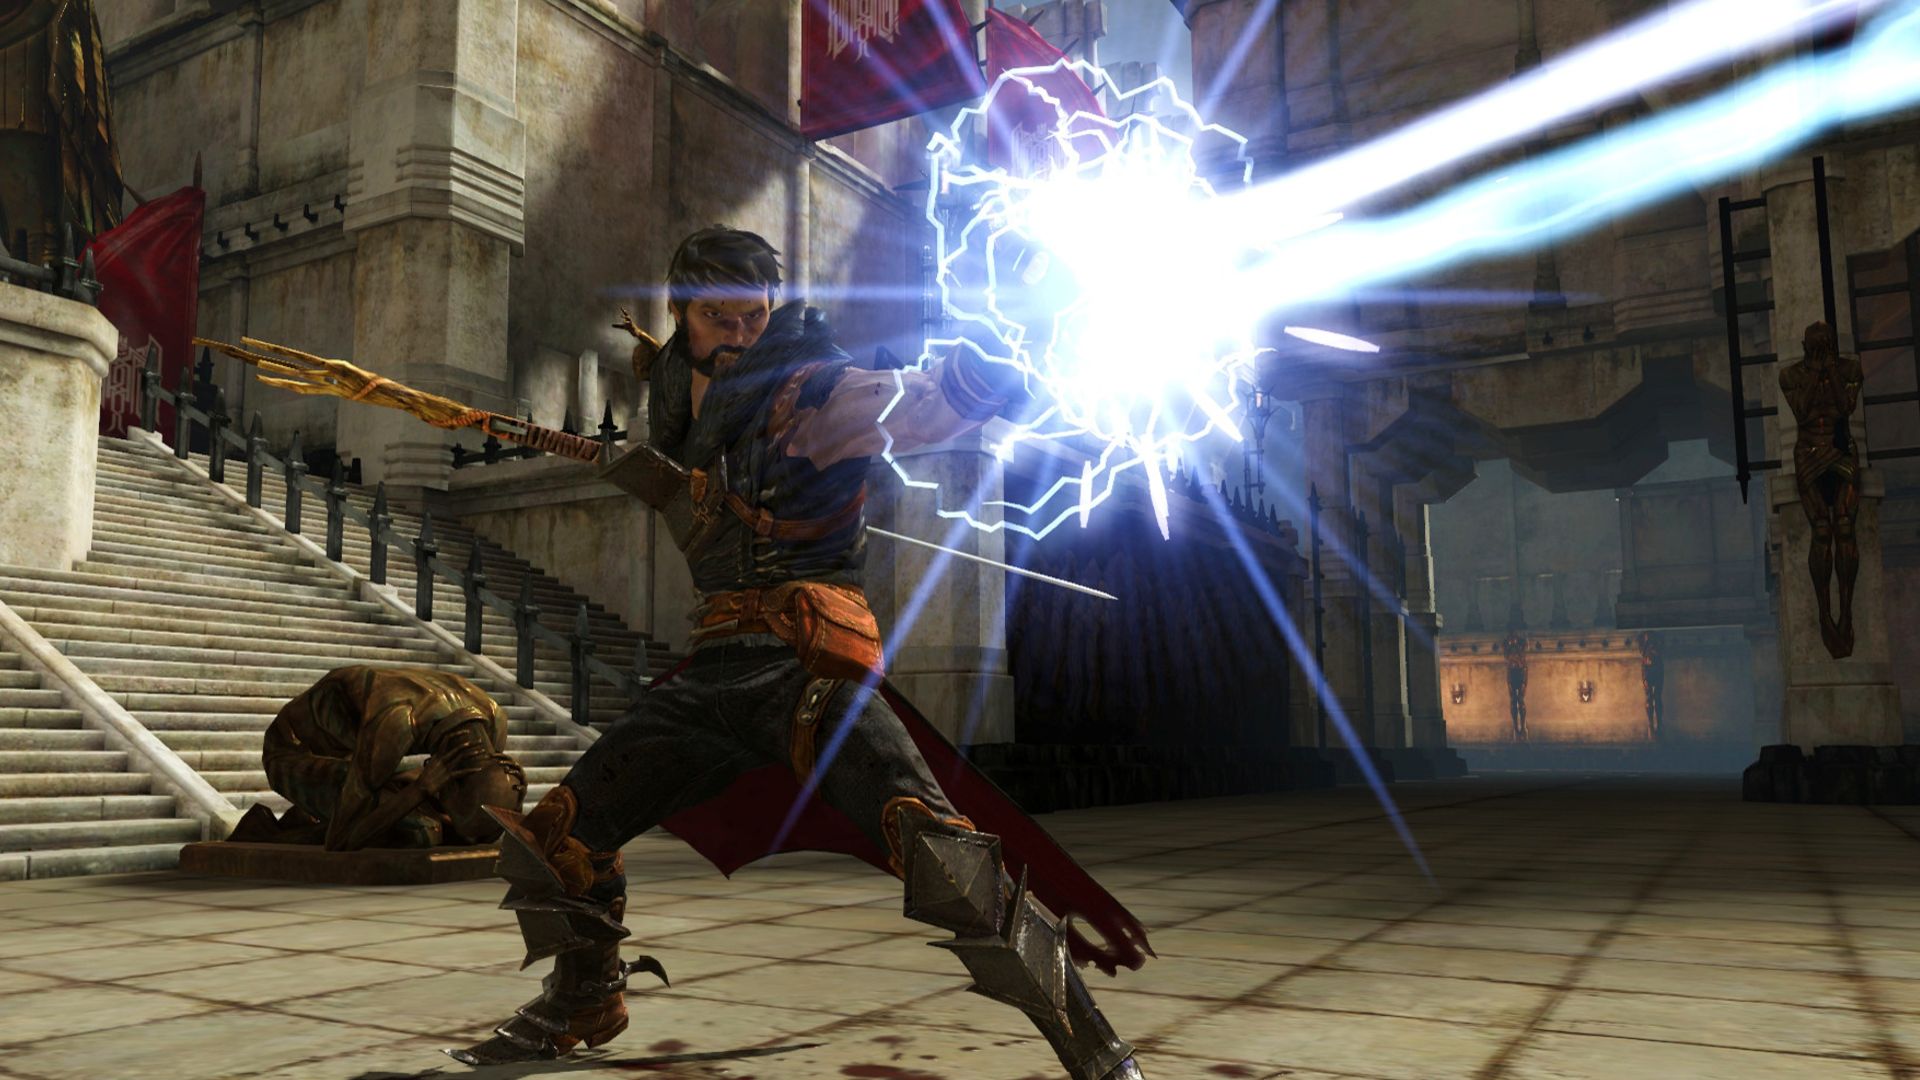 Review: Disjointed Dragon Age II Desperately Lacks Adventure